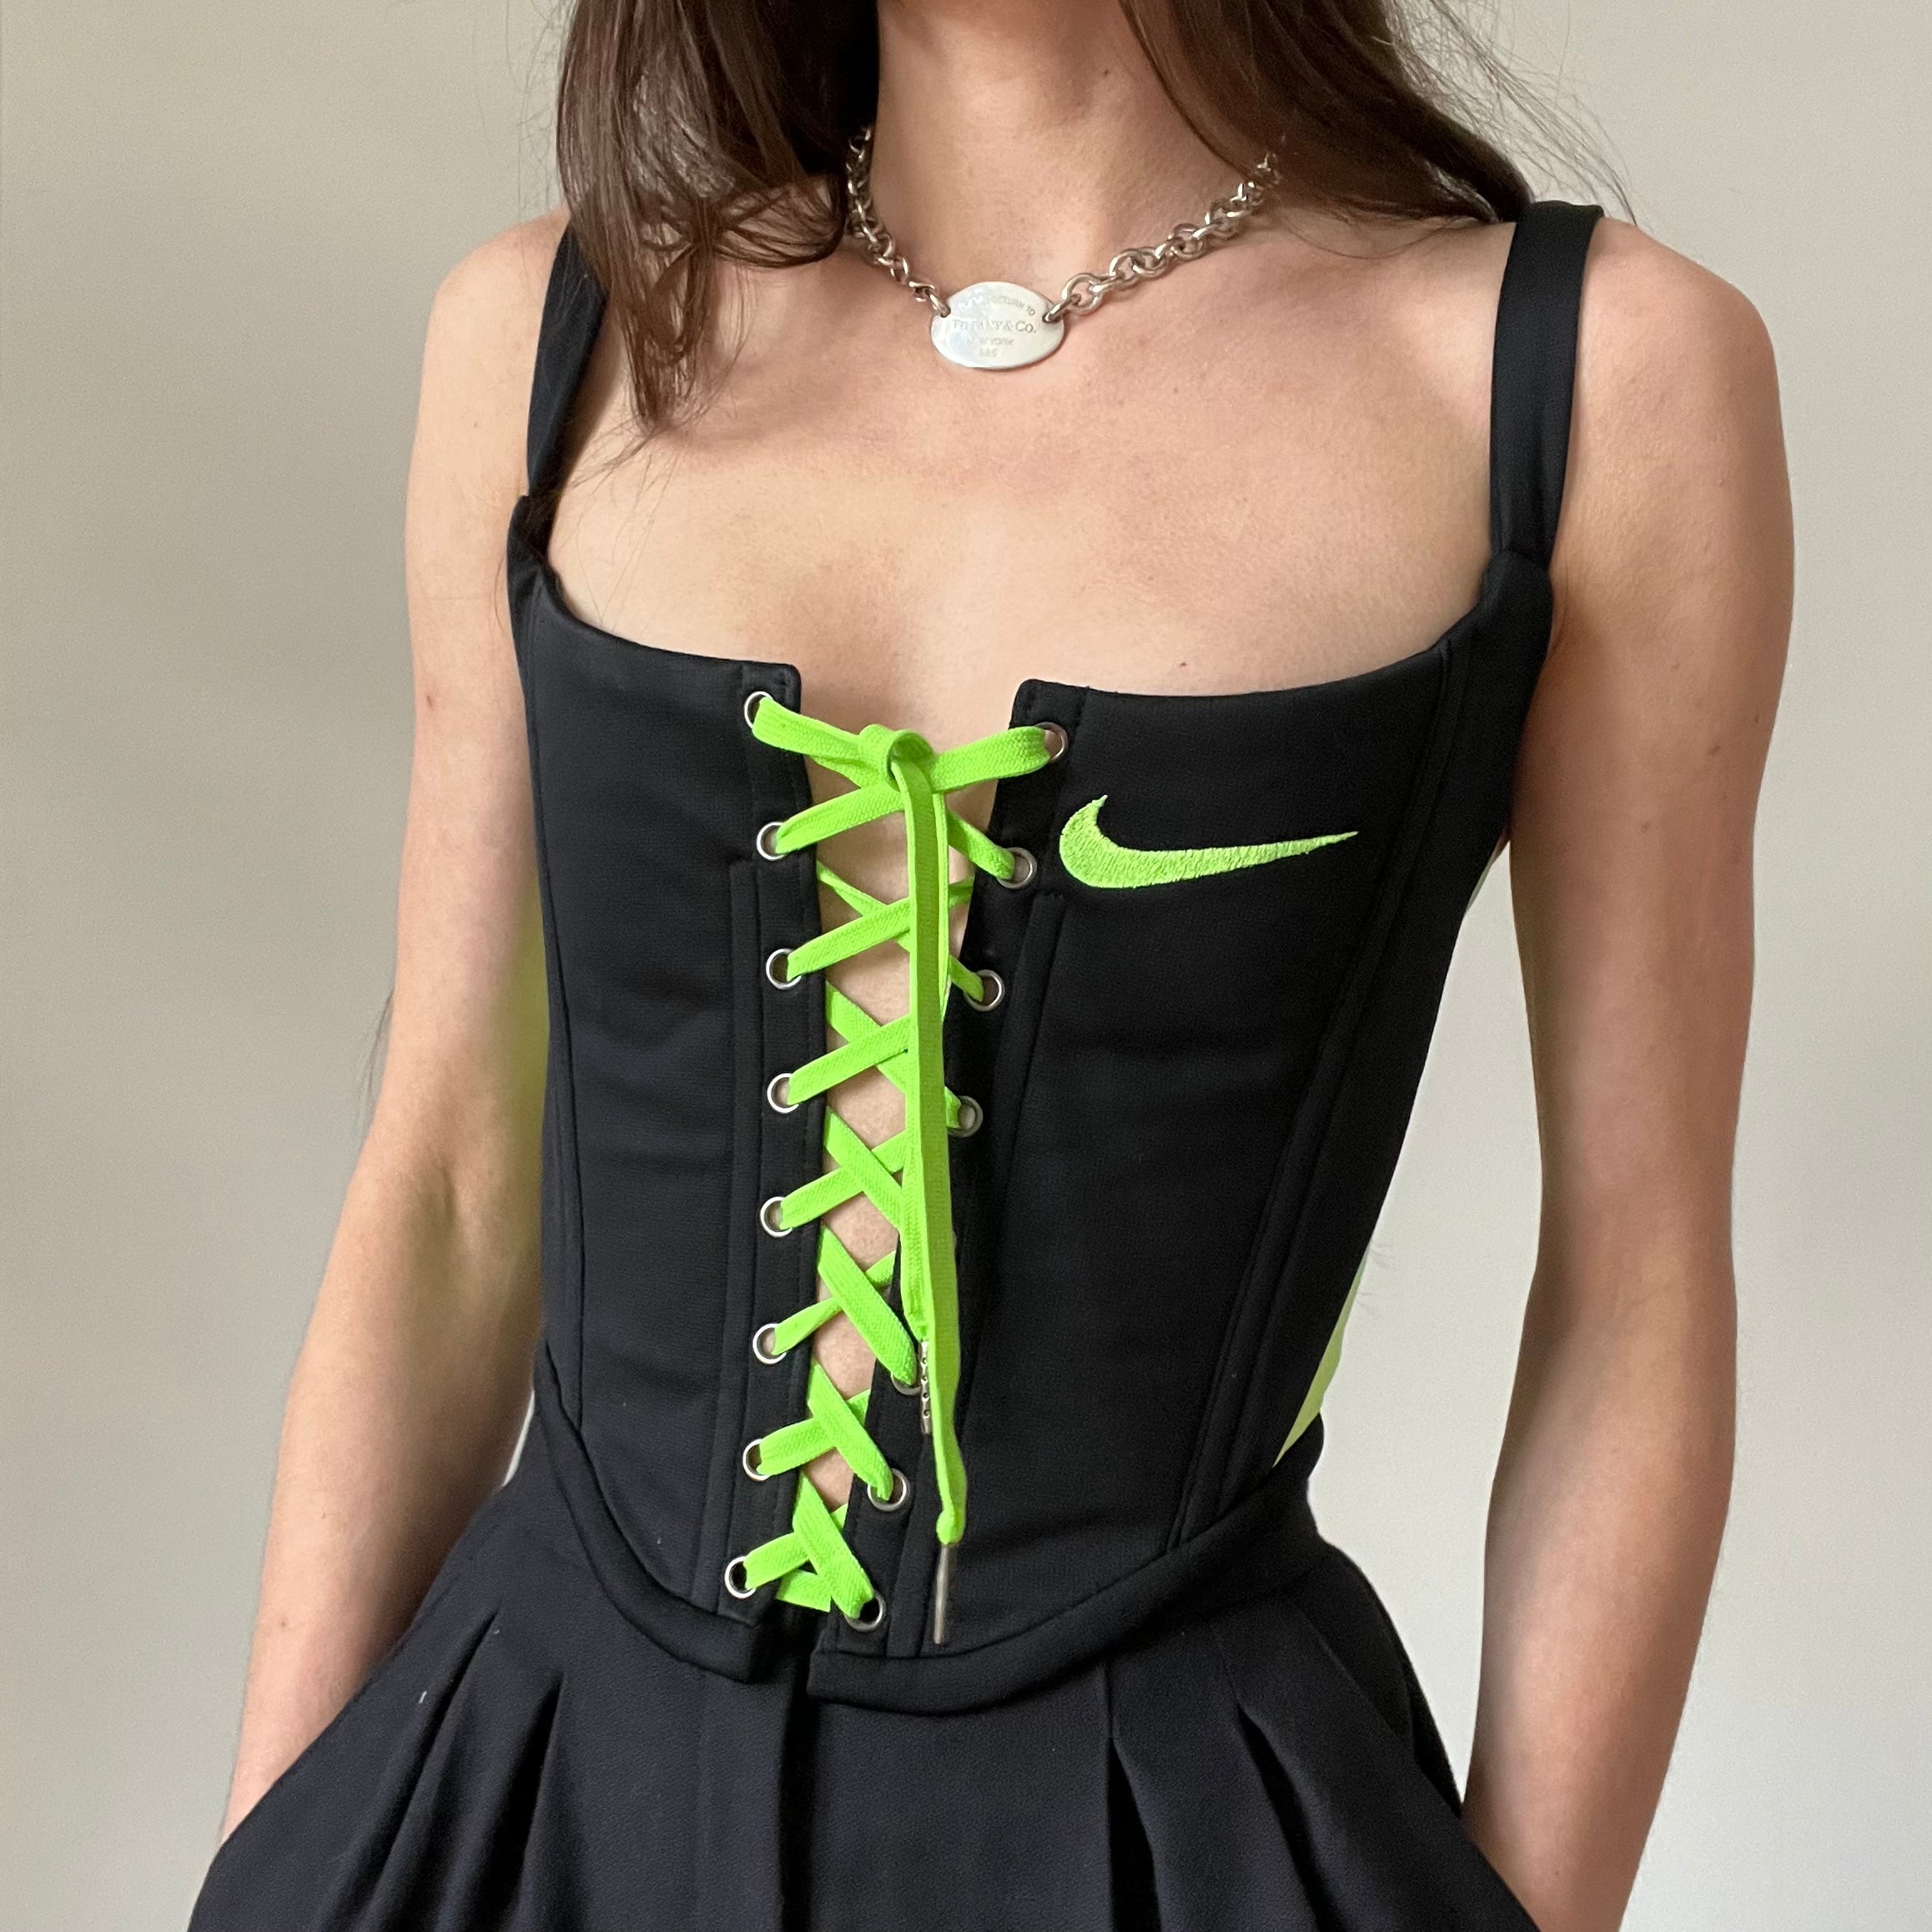 Style this Nike corset with me! #smallbusiness #smallbusinessowner #ni